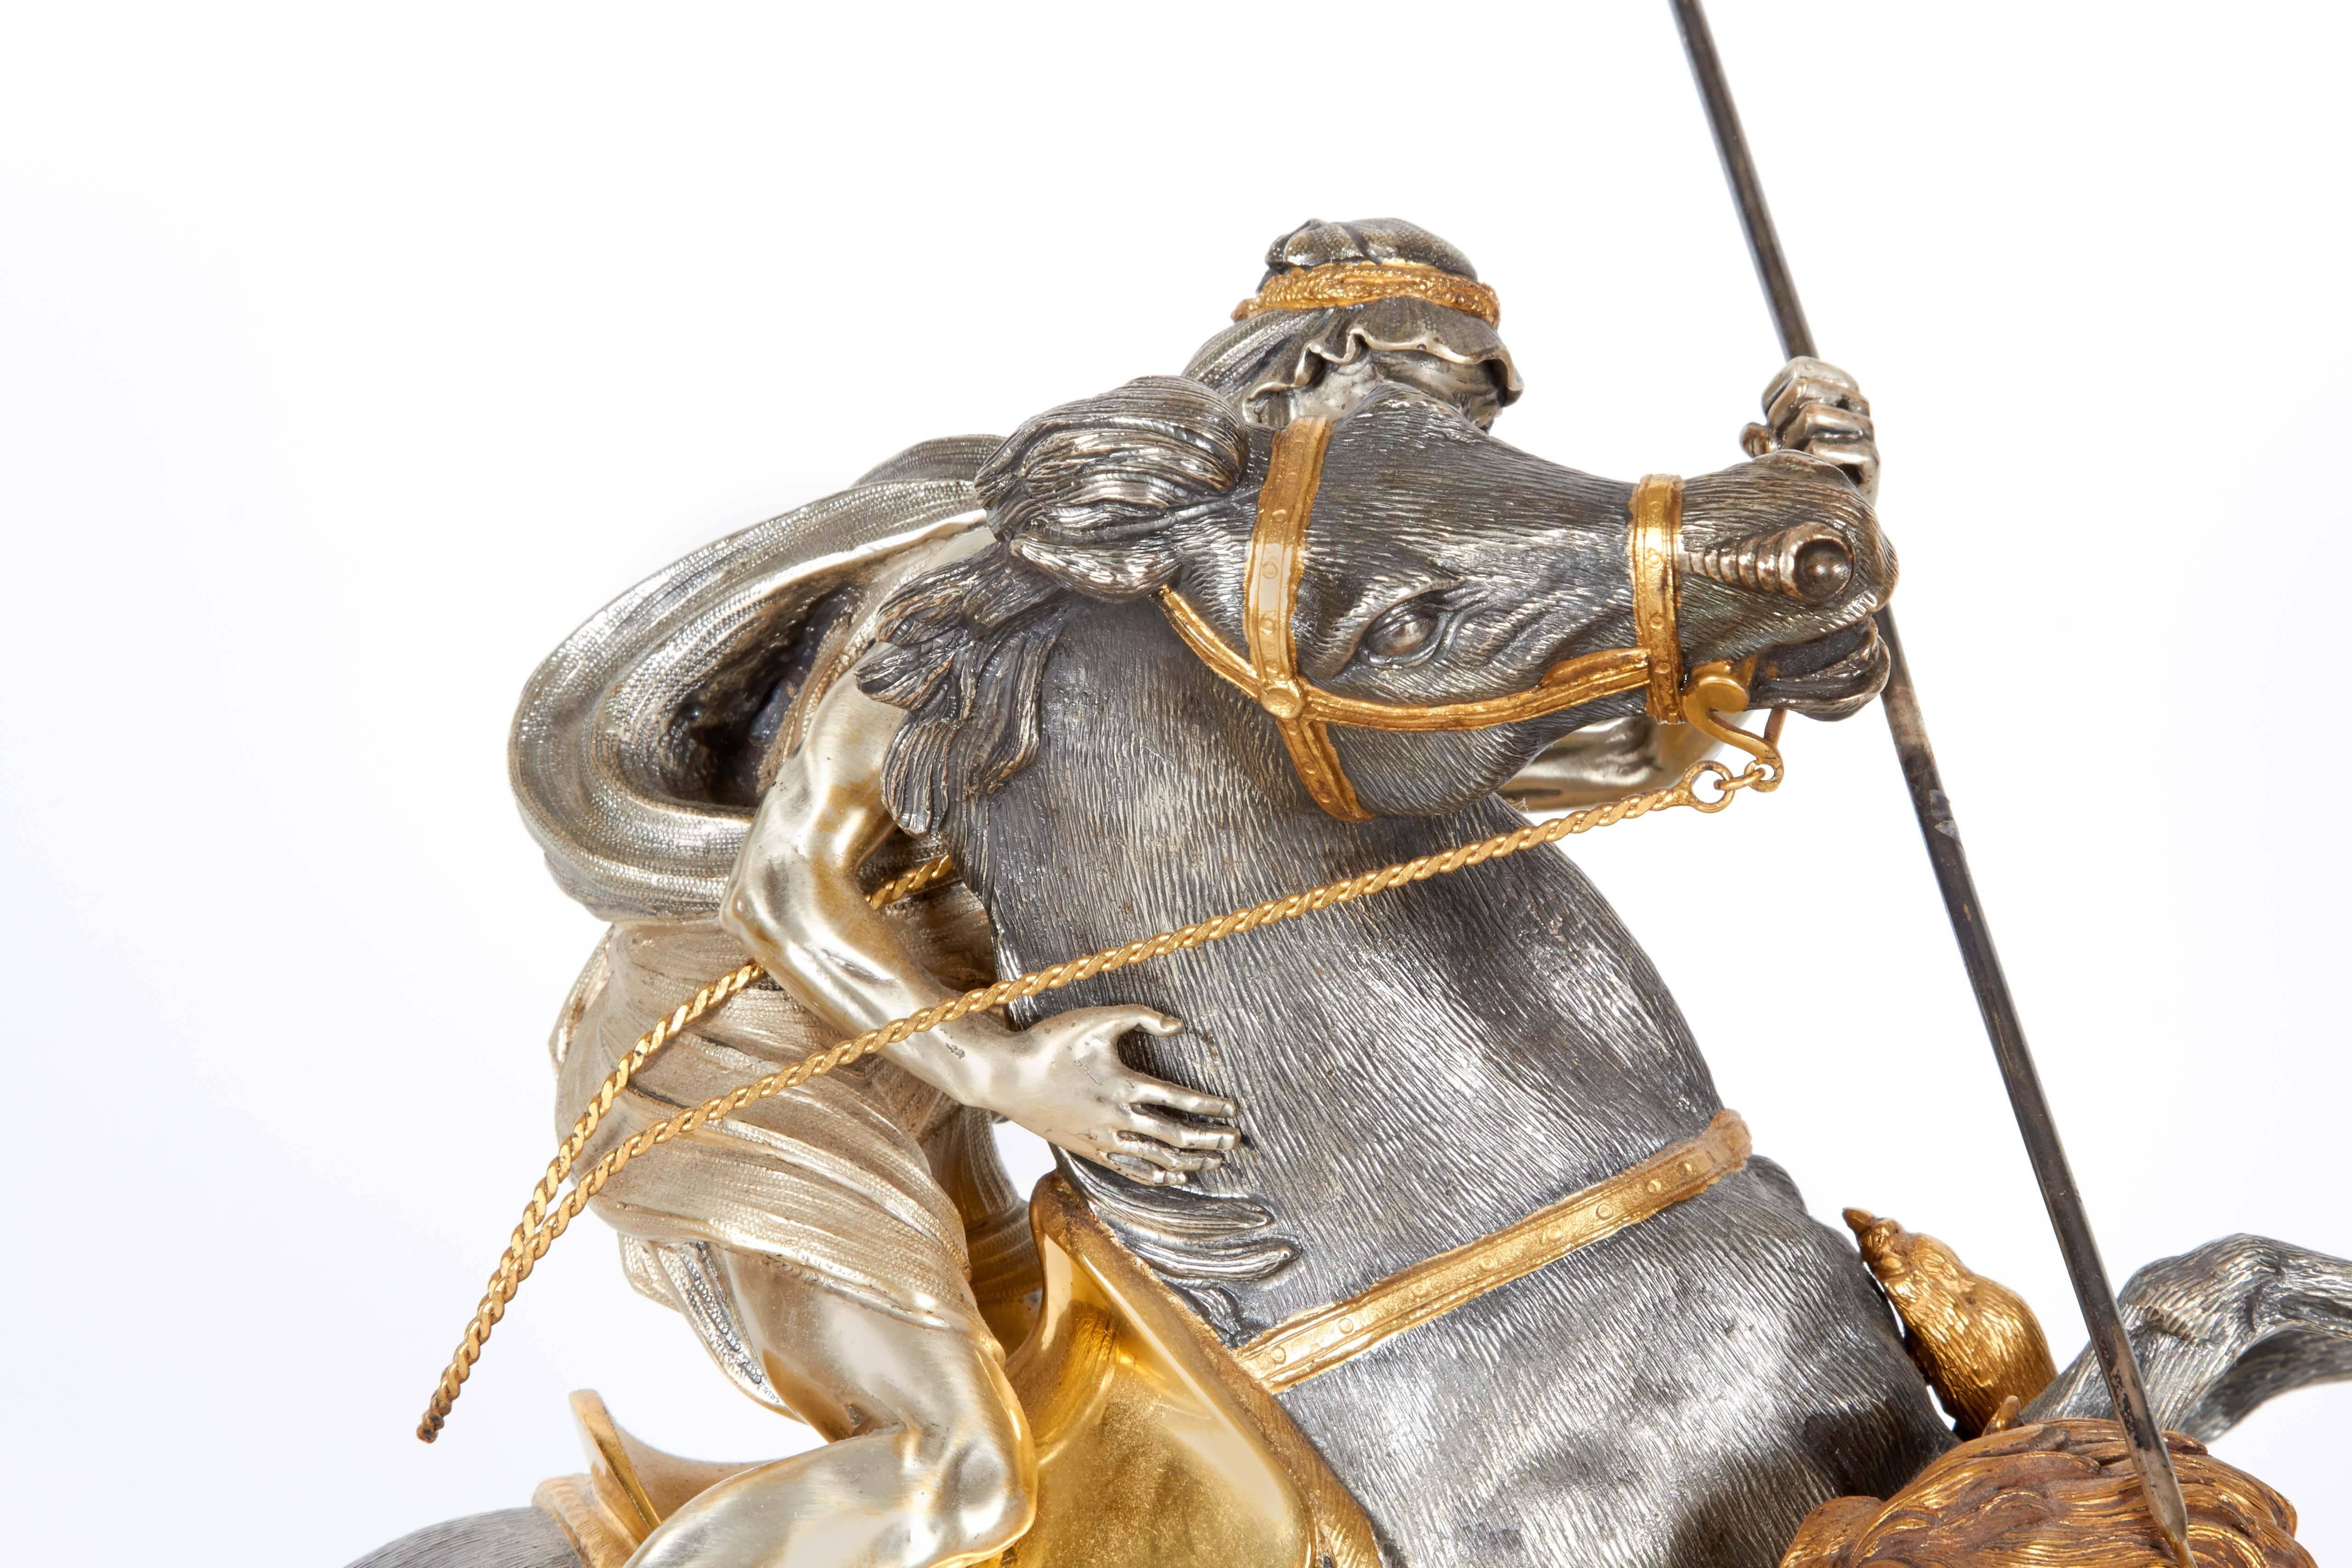 Fine Italian Silver and Silver Gilt Orientalist Sculpture on Malachite Base

Depicting an Arab horse rider defeating a lion. Solid silver. 

Marked 800 for silver.